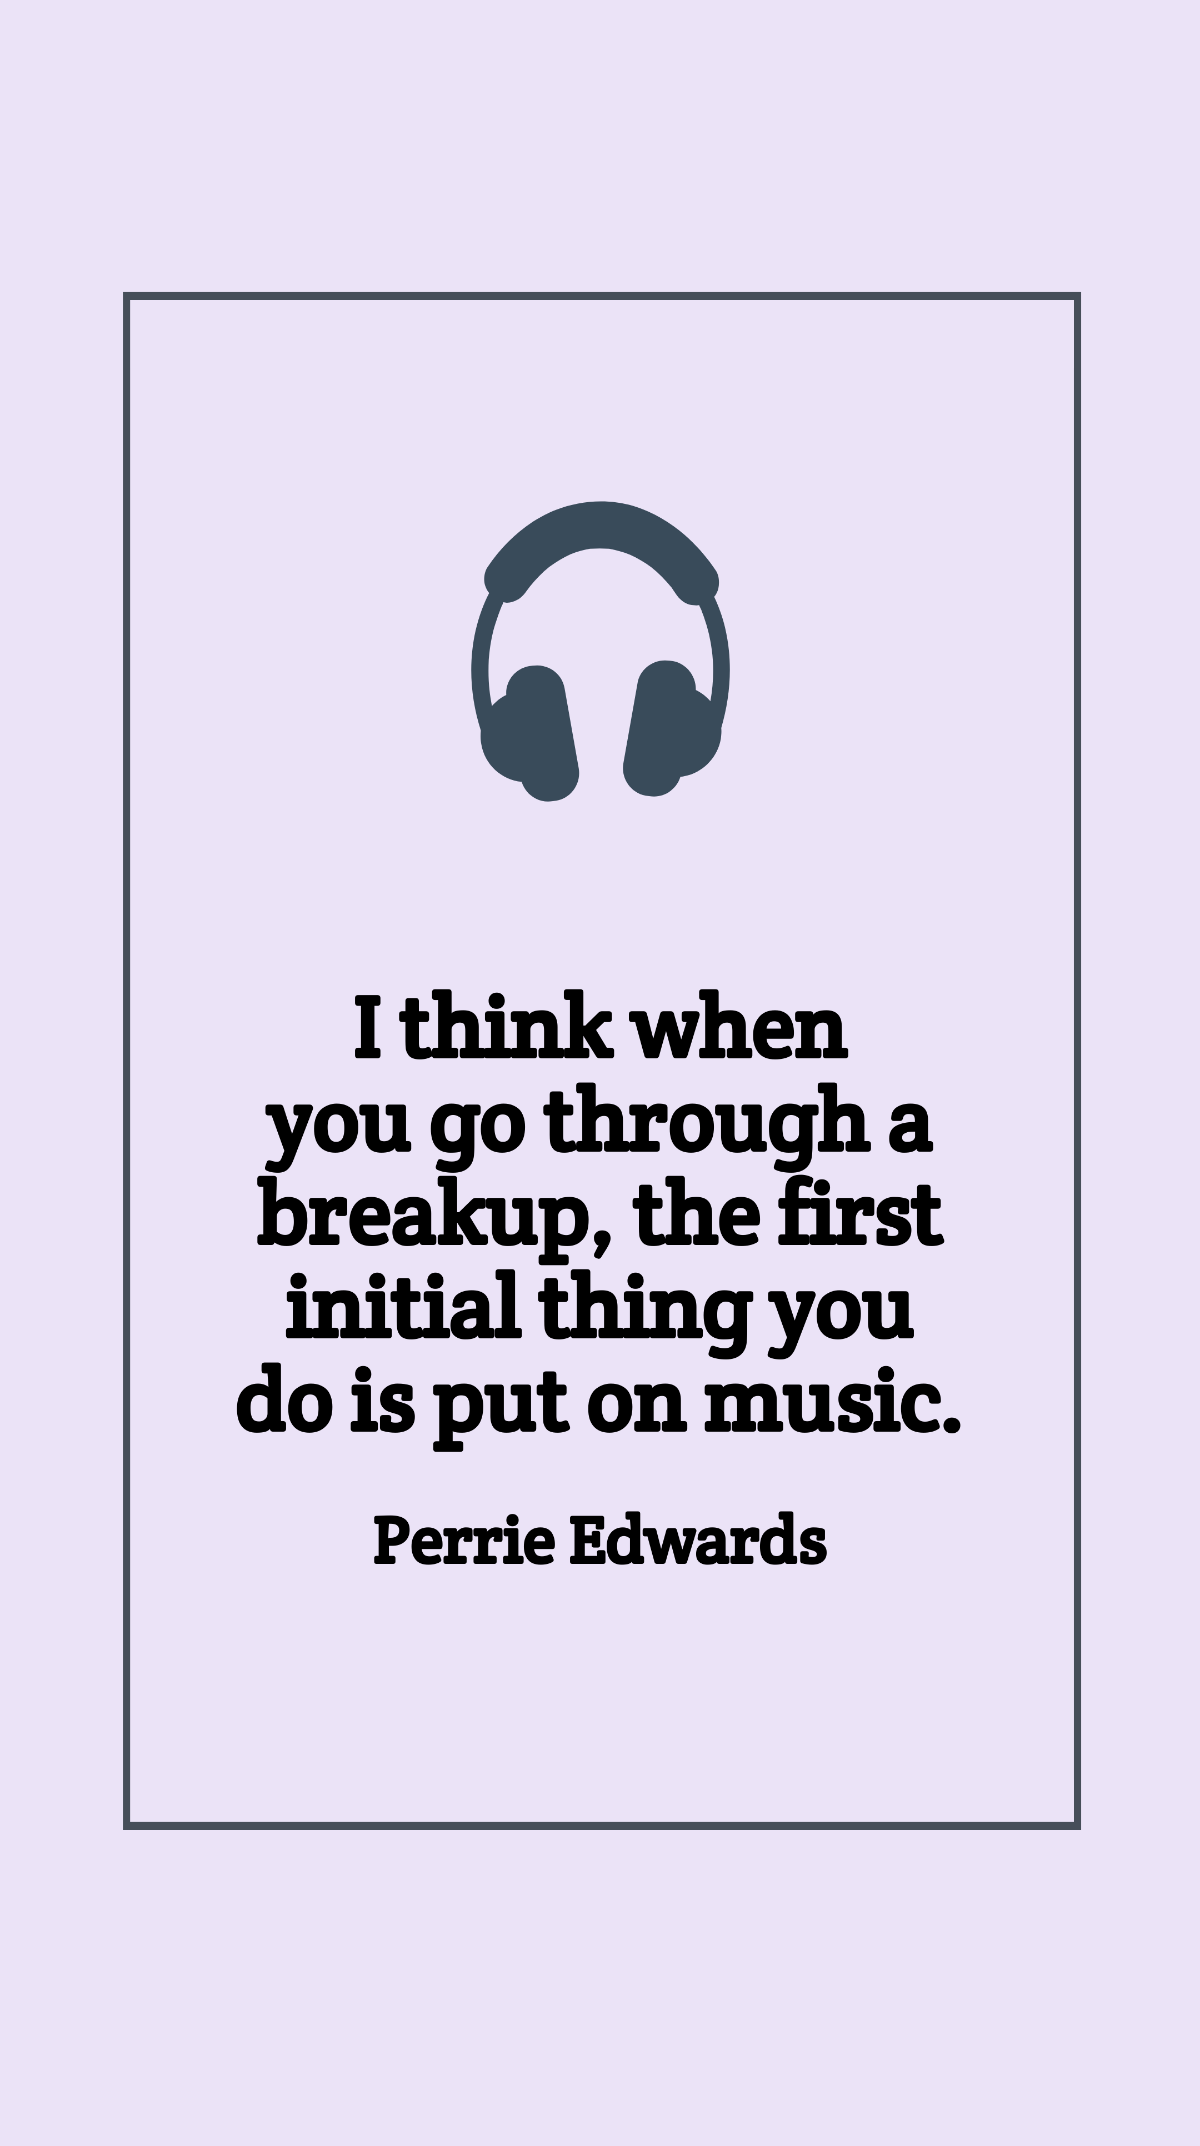 Perrie Edwards - I think when you go through a breakup, the first initial thing you do is put on music.